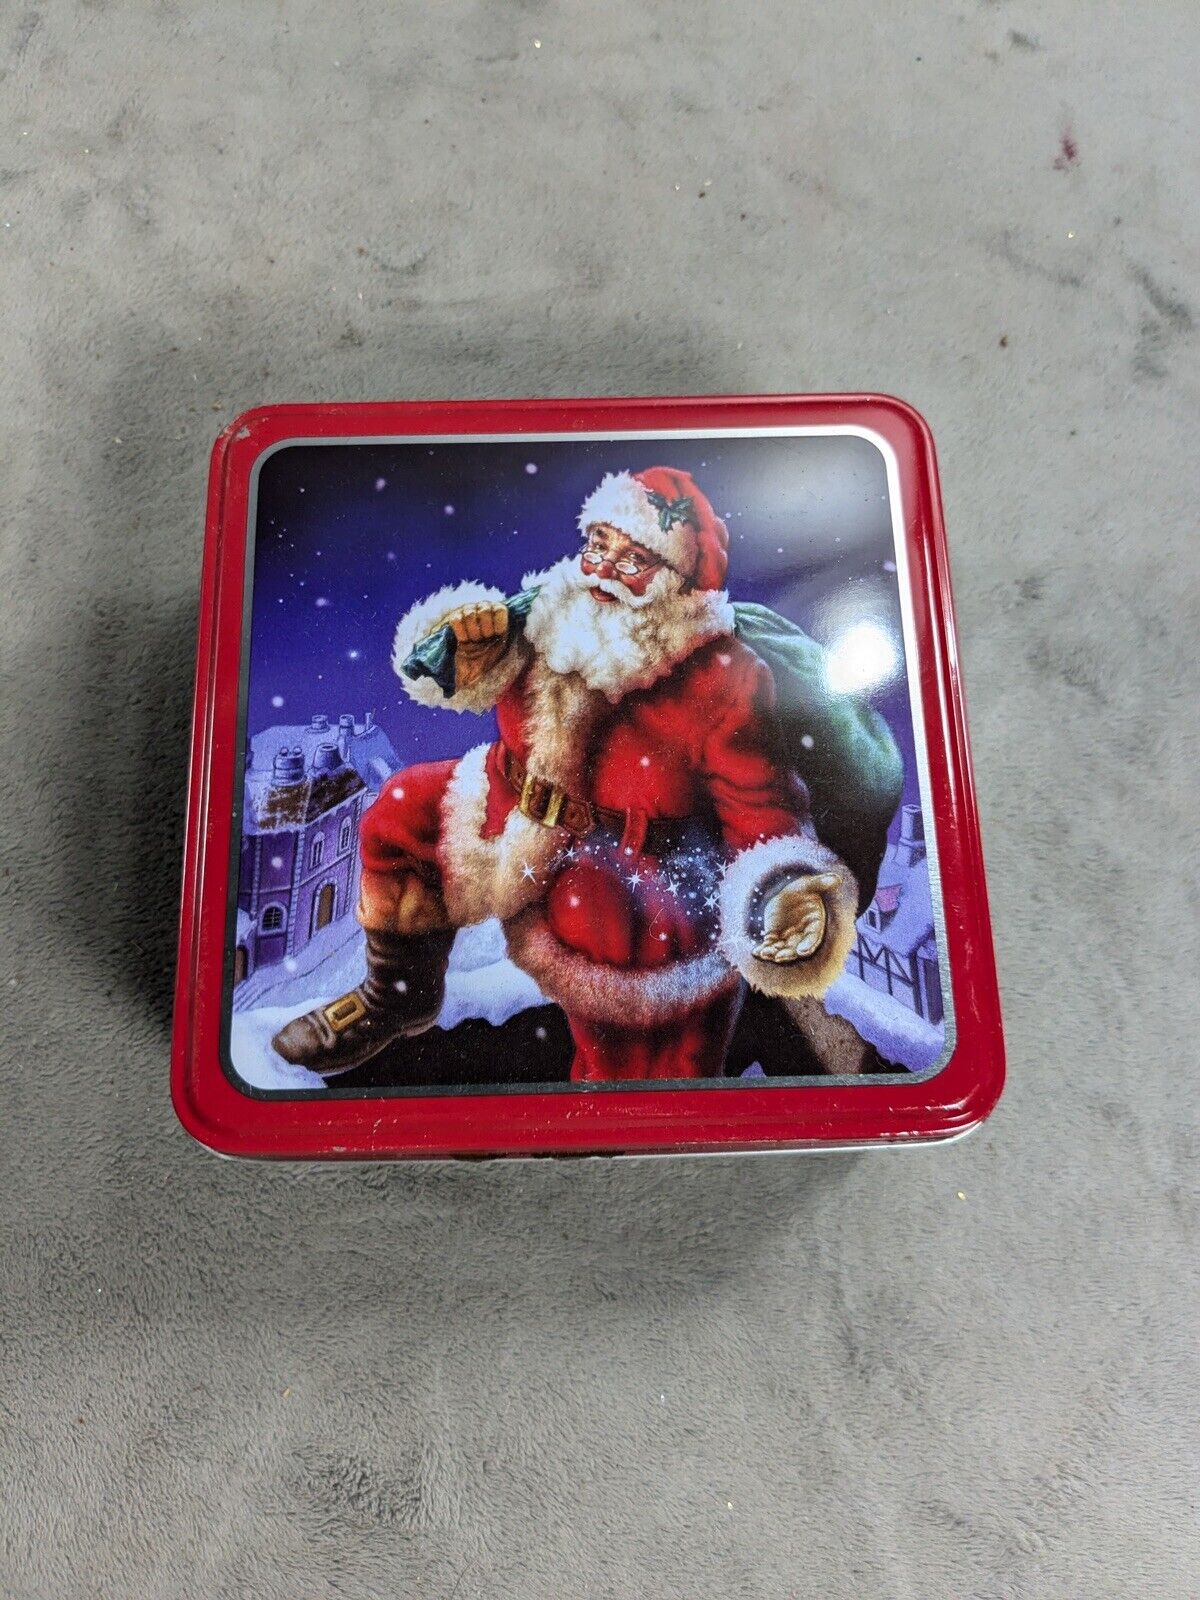 Christmas Santa Holiday Metal Square Cookie Tin Container Appx 6x6”